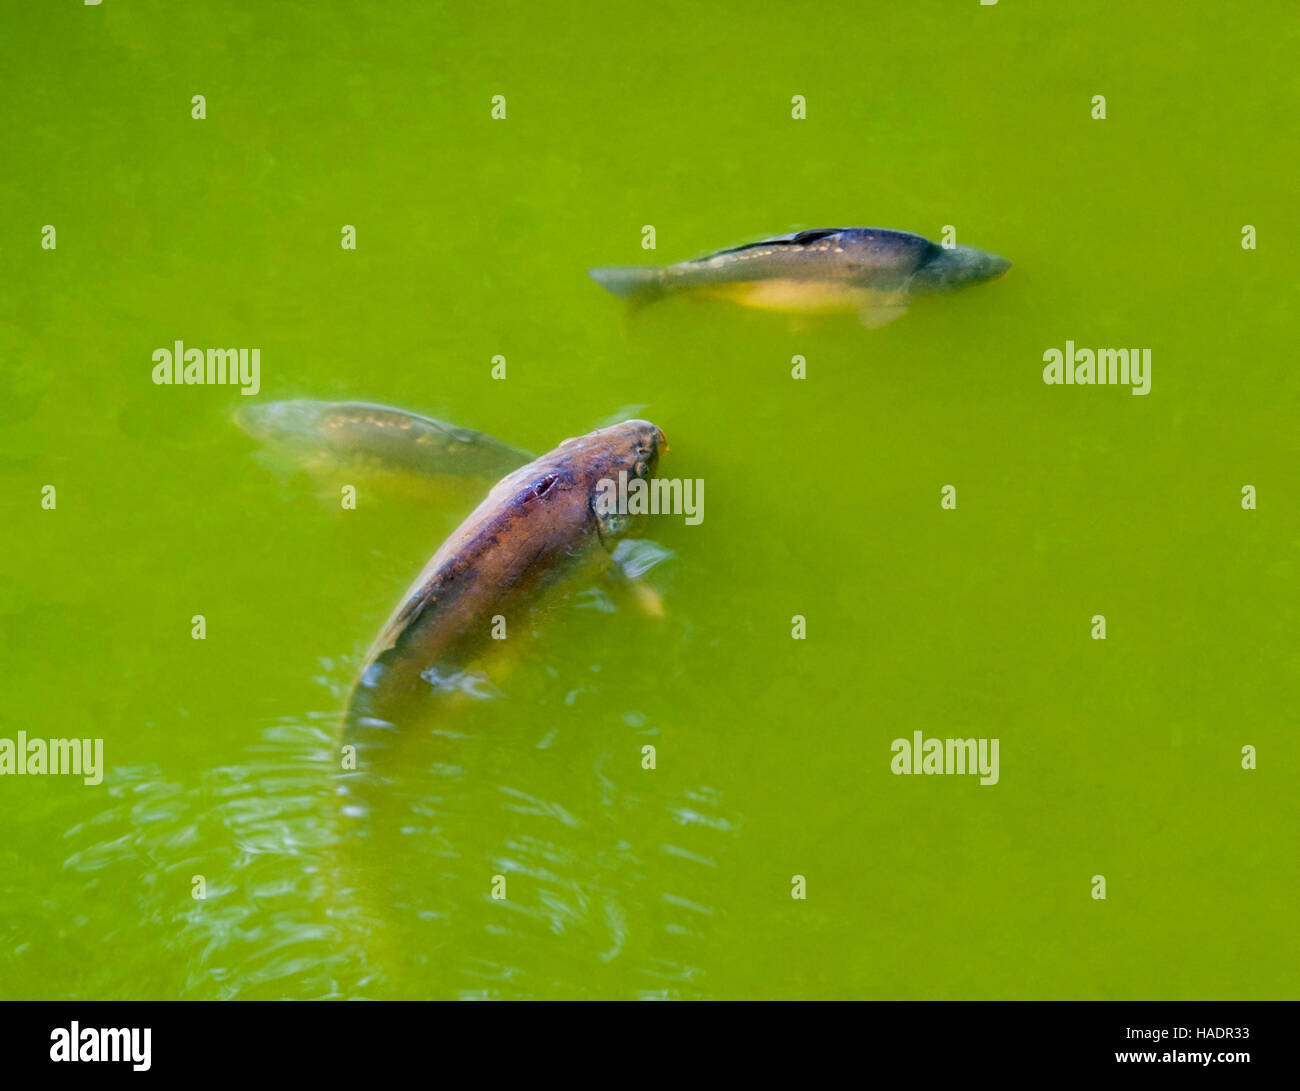 high angle shot of some common carps in green water ambiance Stock Photo